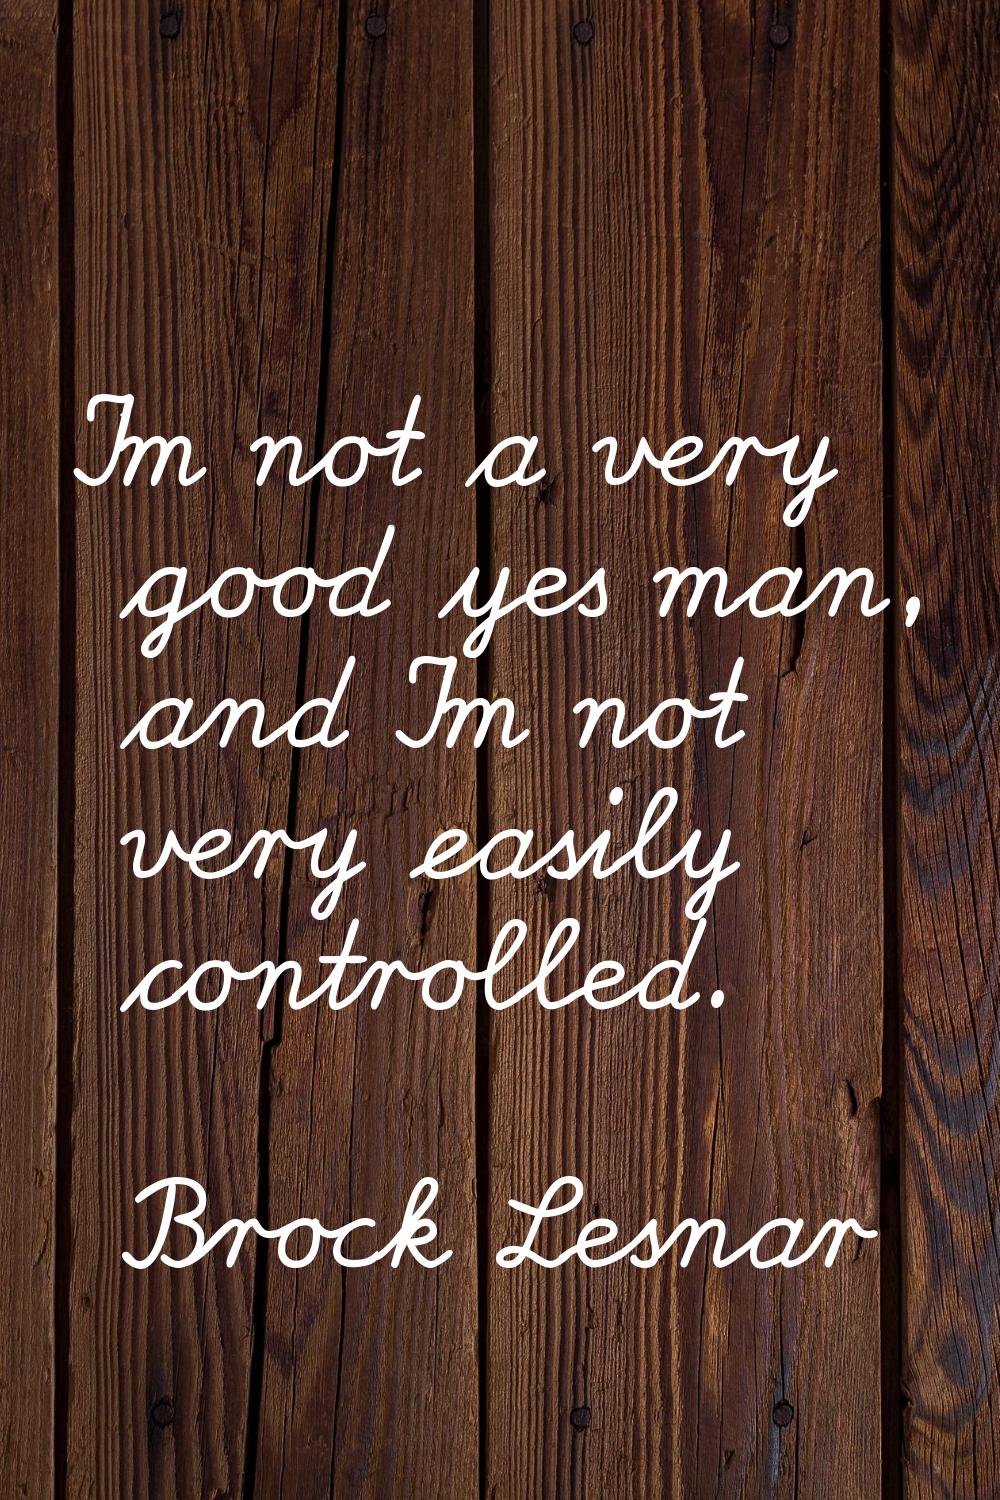 I'm not a very good yes man, and I'm not very easily controlled.